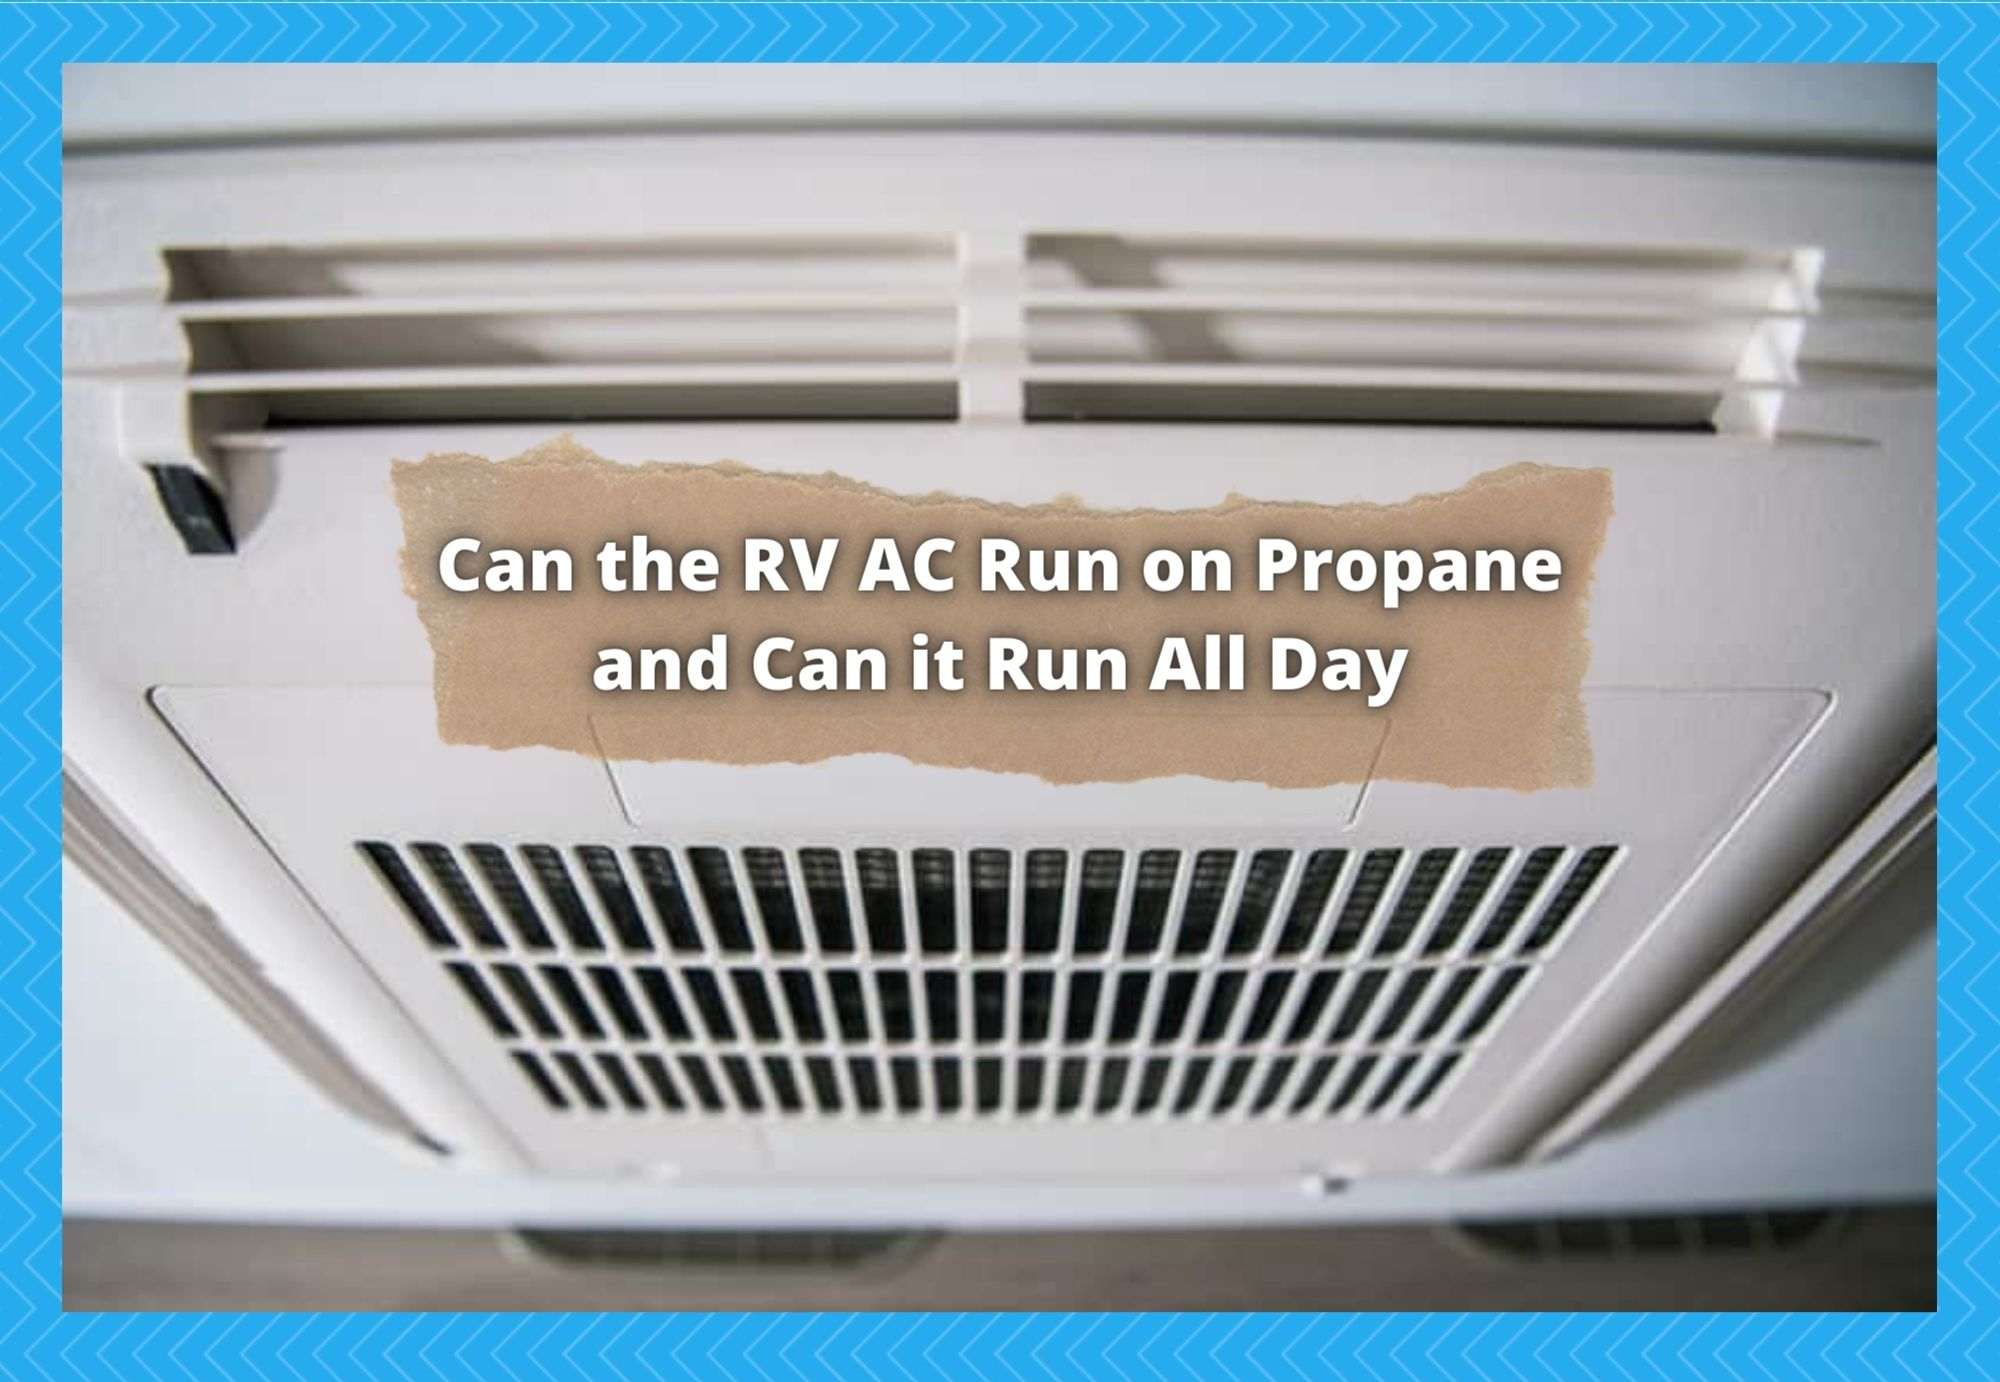 Can the RV AC Run on Propane and Can it Run All Day